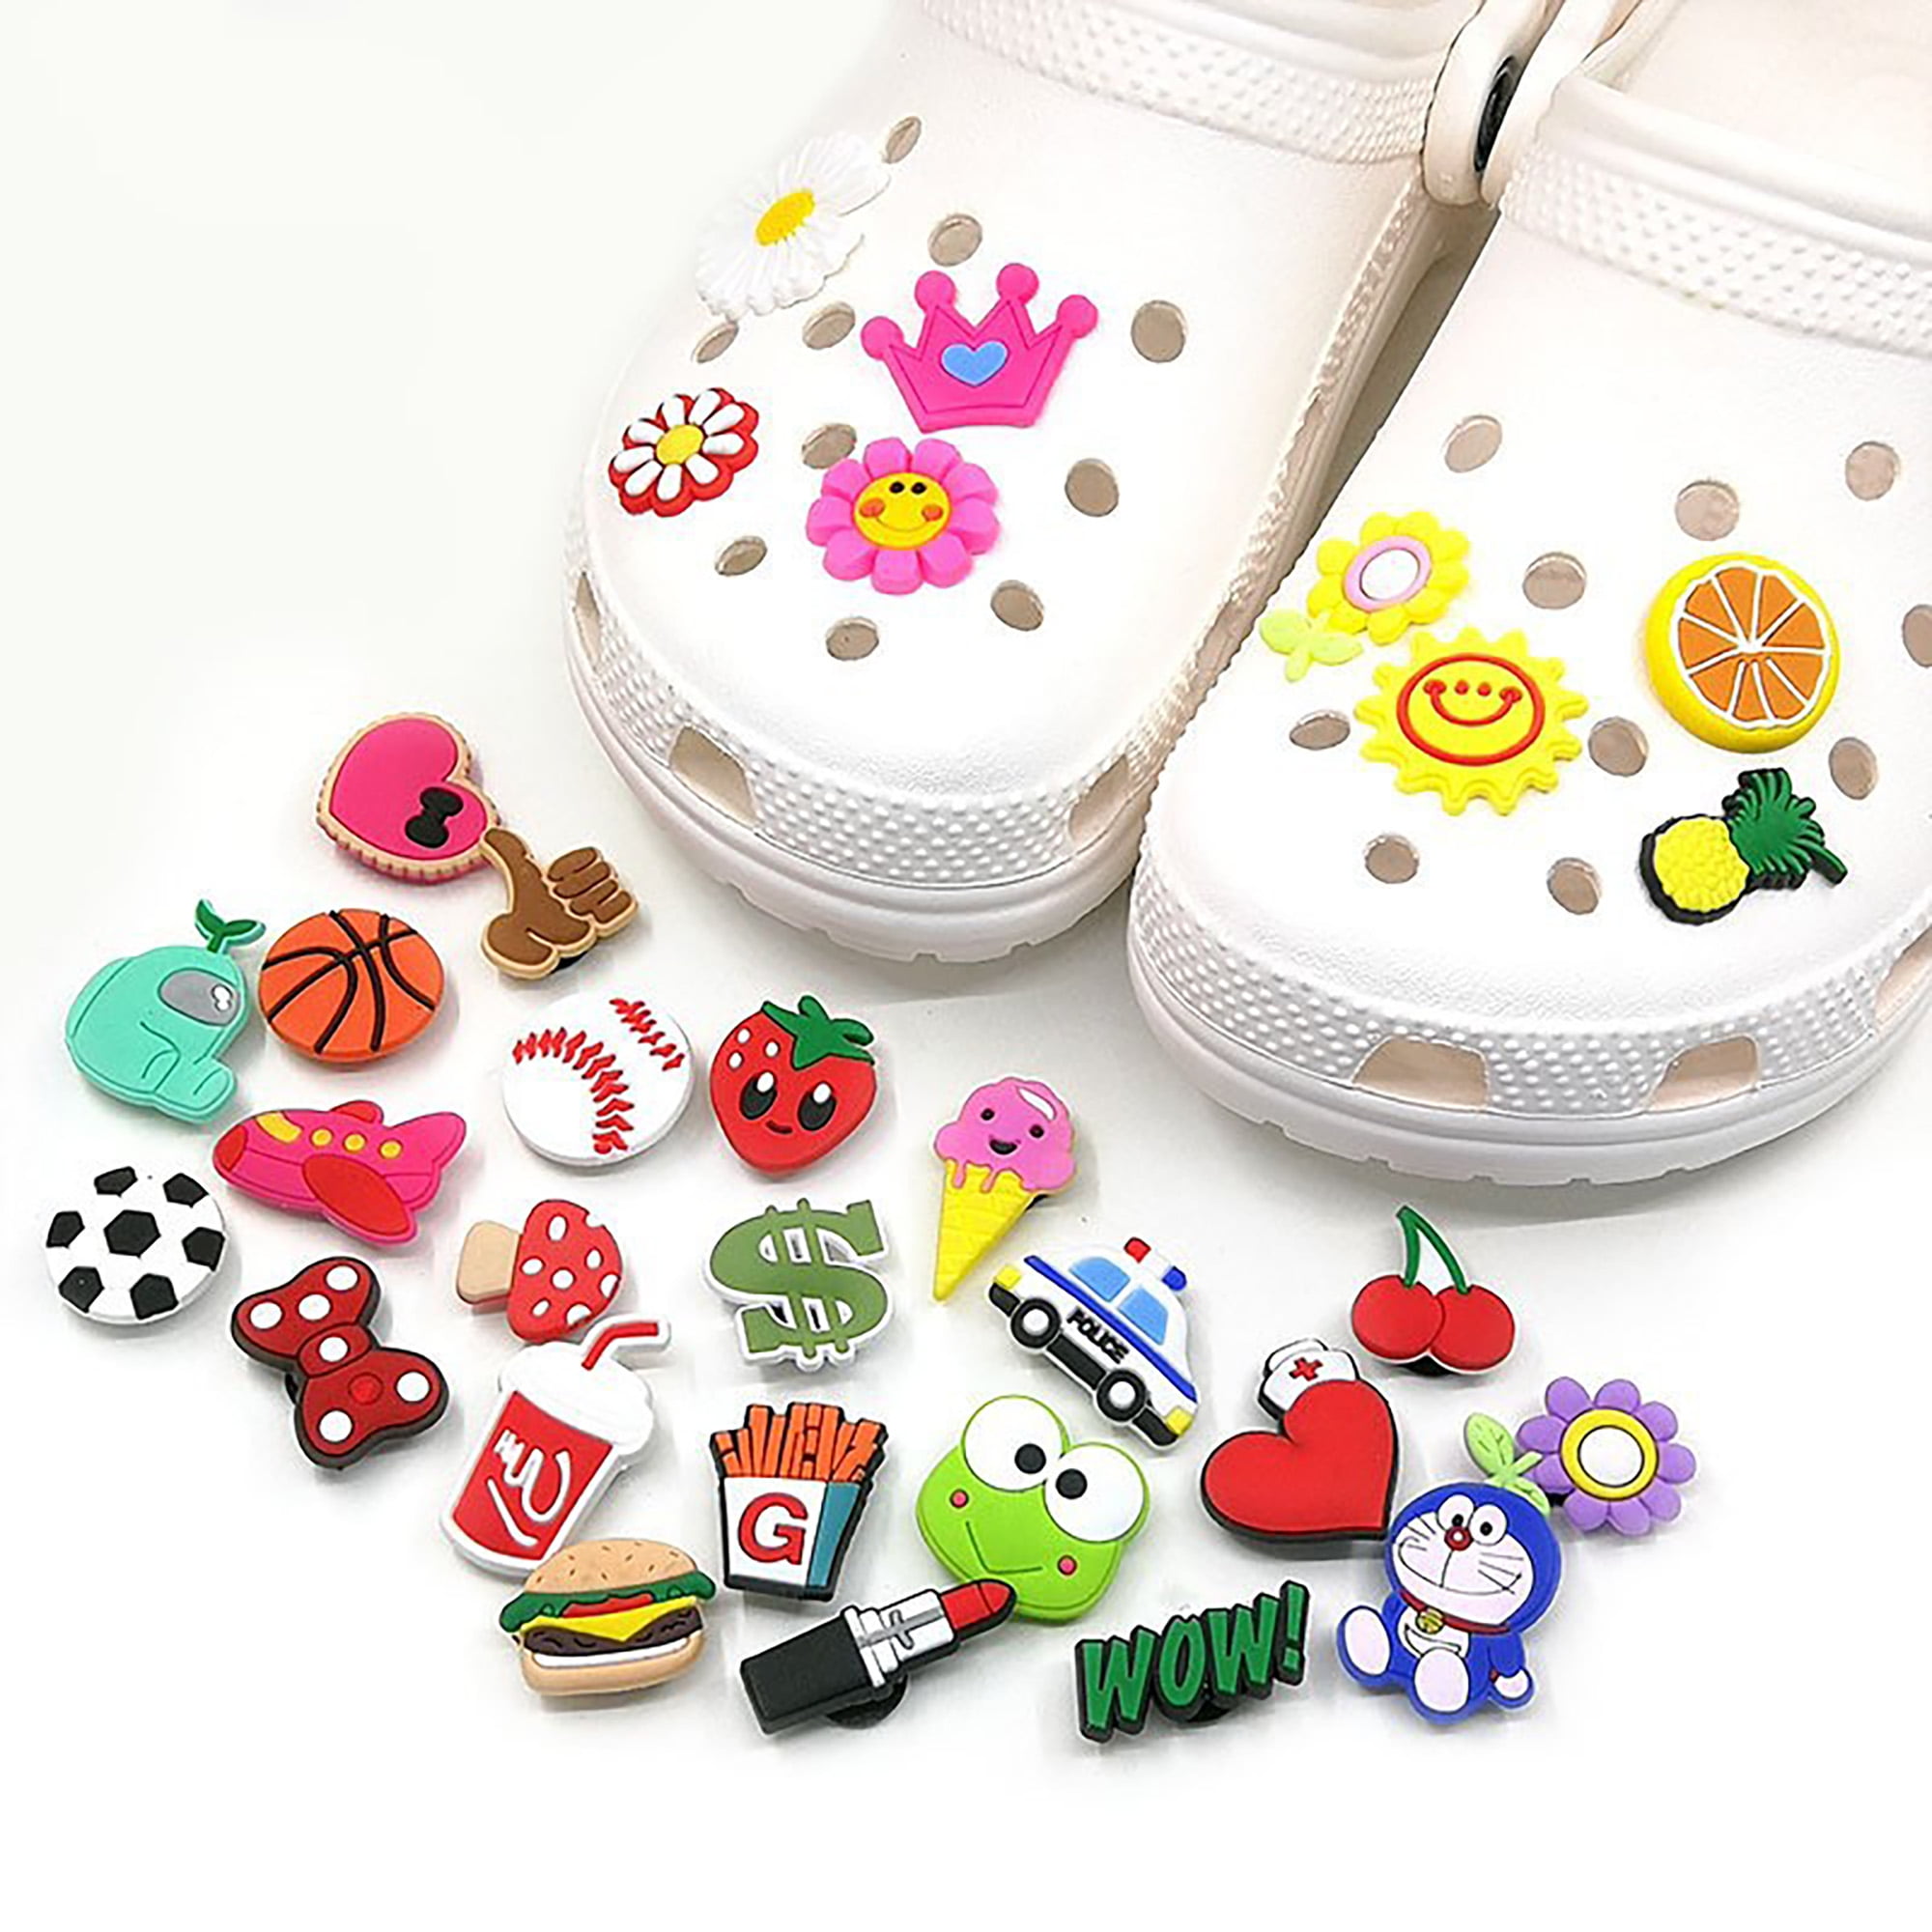 We1stdsee 30Pcs Spiderman Shoe Decoration Charms for Kids Girls Boys